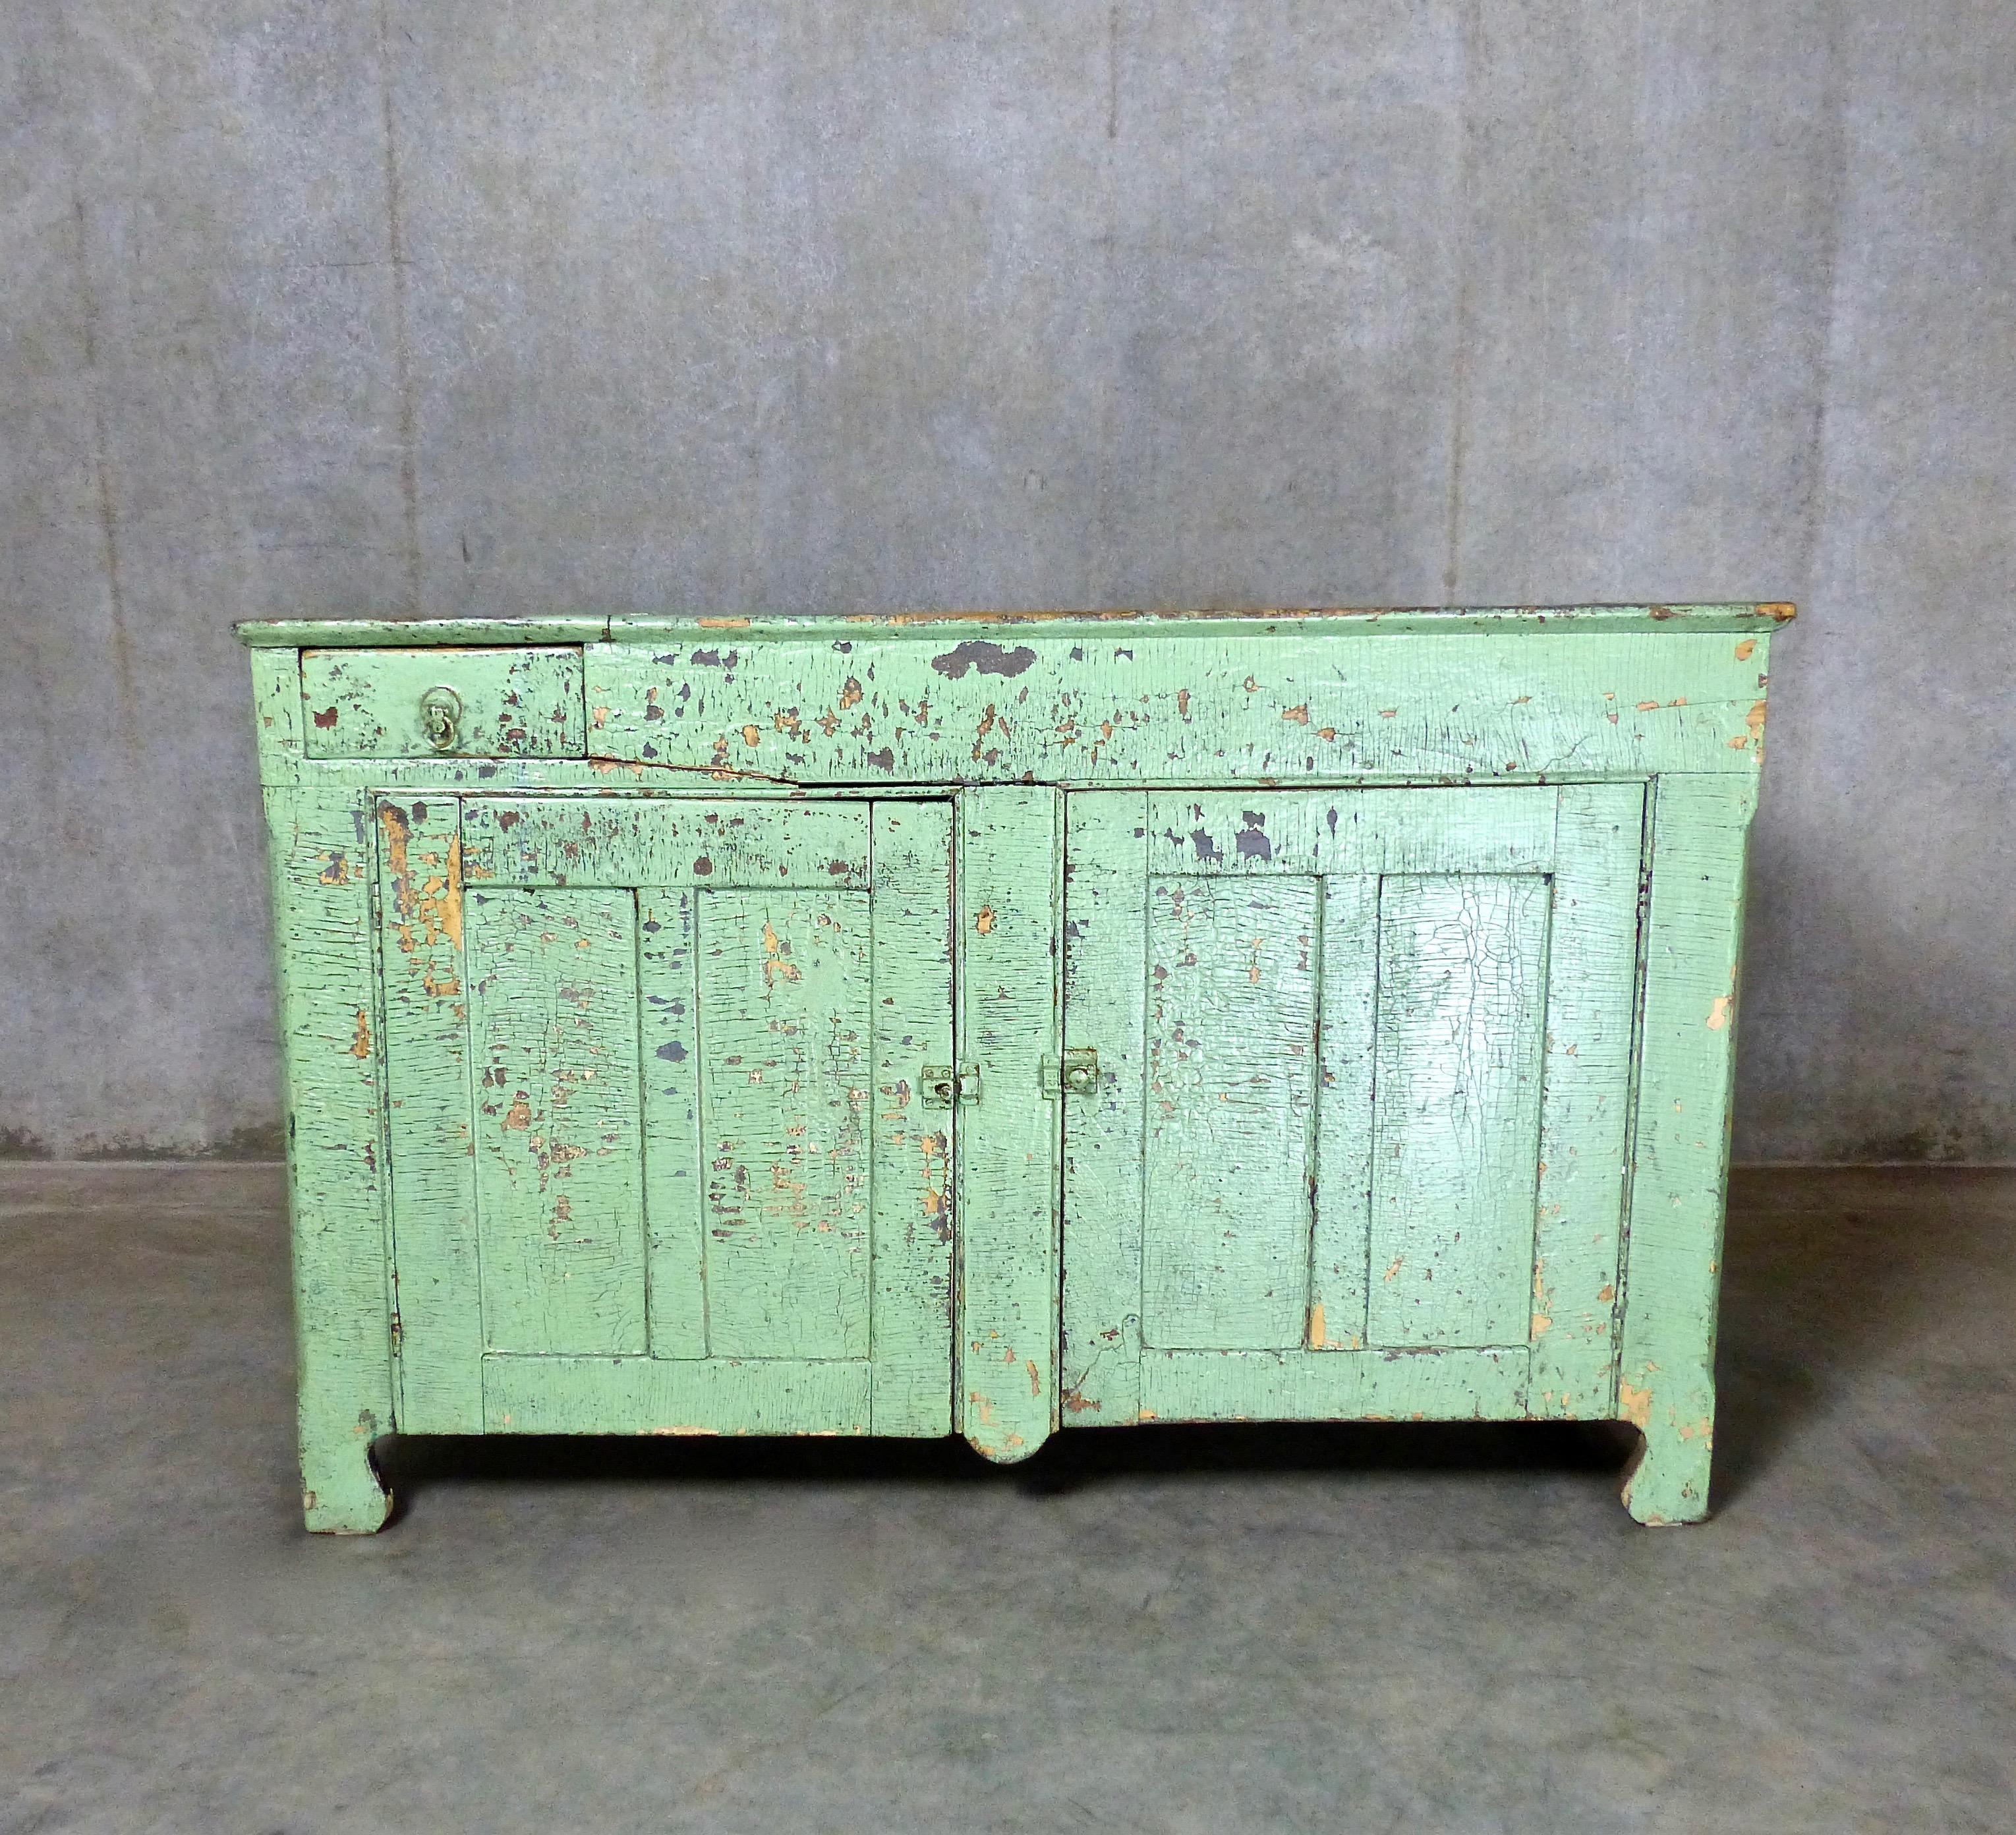 Ontario dry sink in original bright green polychrome paint, circa 1870. This piece has an untouched, sealed, aged cracked surface.
Features shelves behind cabinet doors plus one small drawer.
Excellent as a bar or serving station. Dimensions: 31